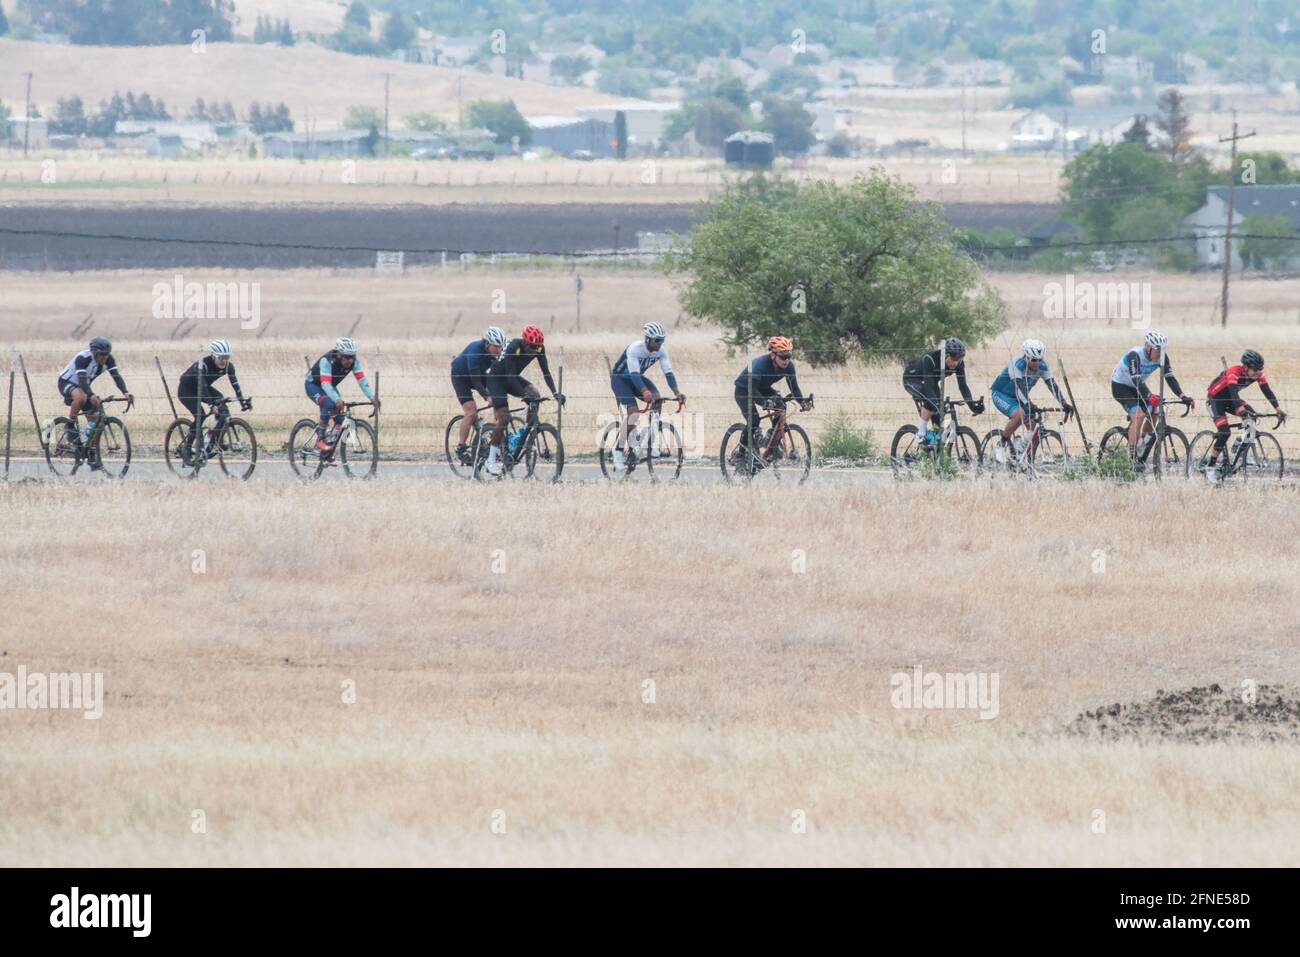 A biking club rides across a flat portion of road in the East bay region of California. The cyclists line up in a row on their bikes. Stock Photo